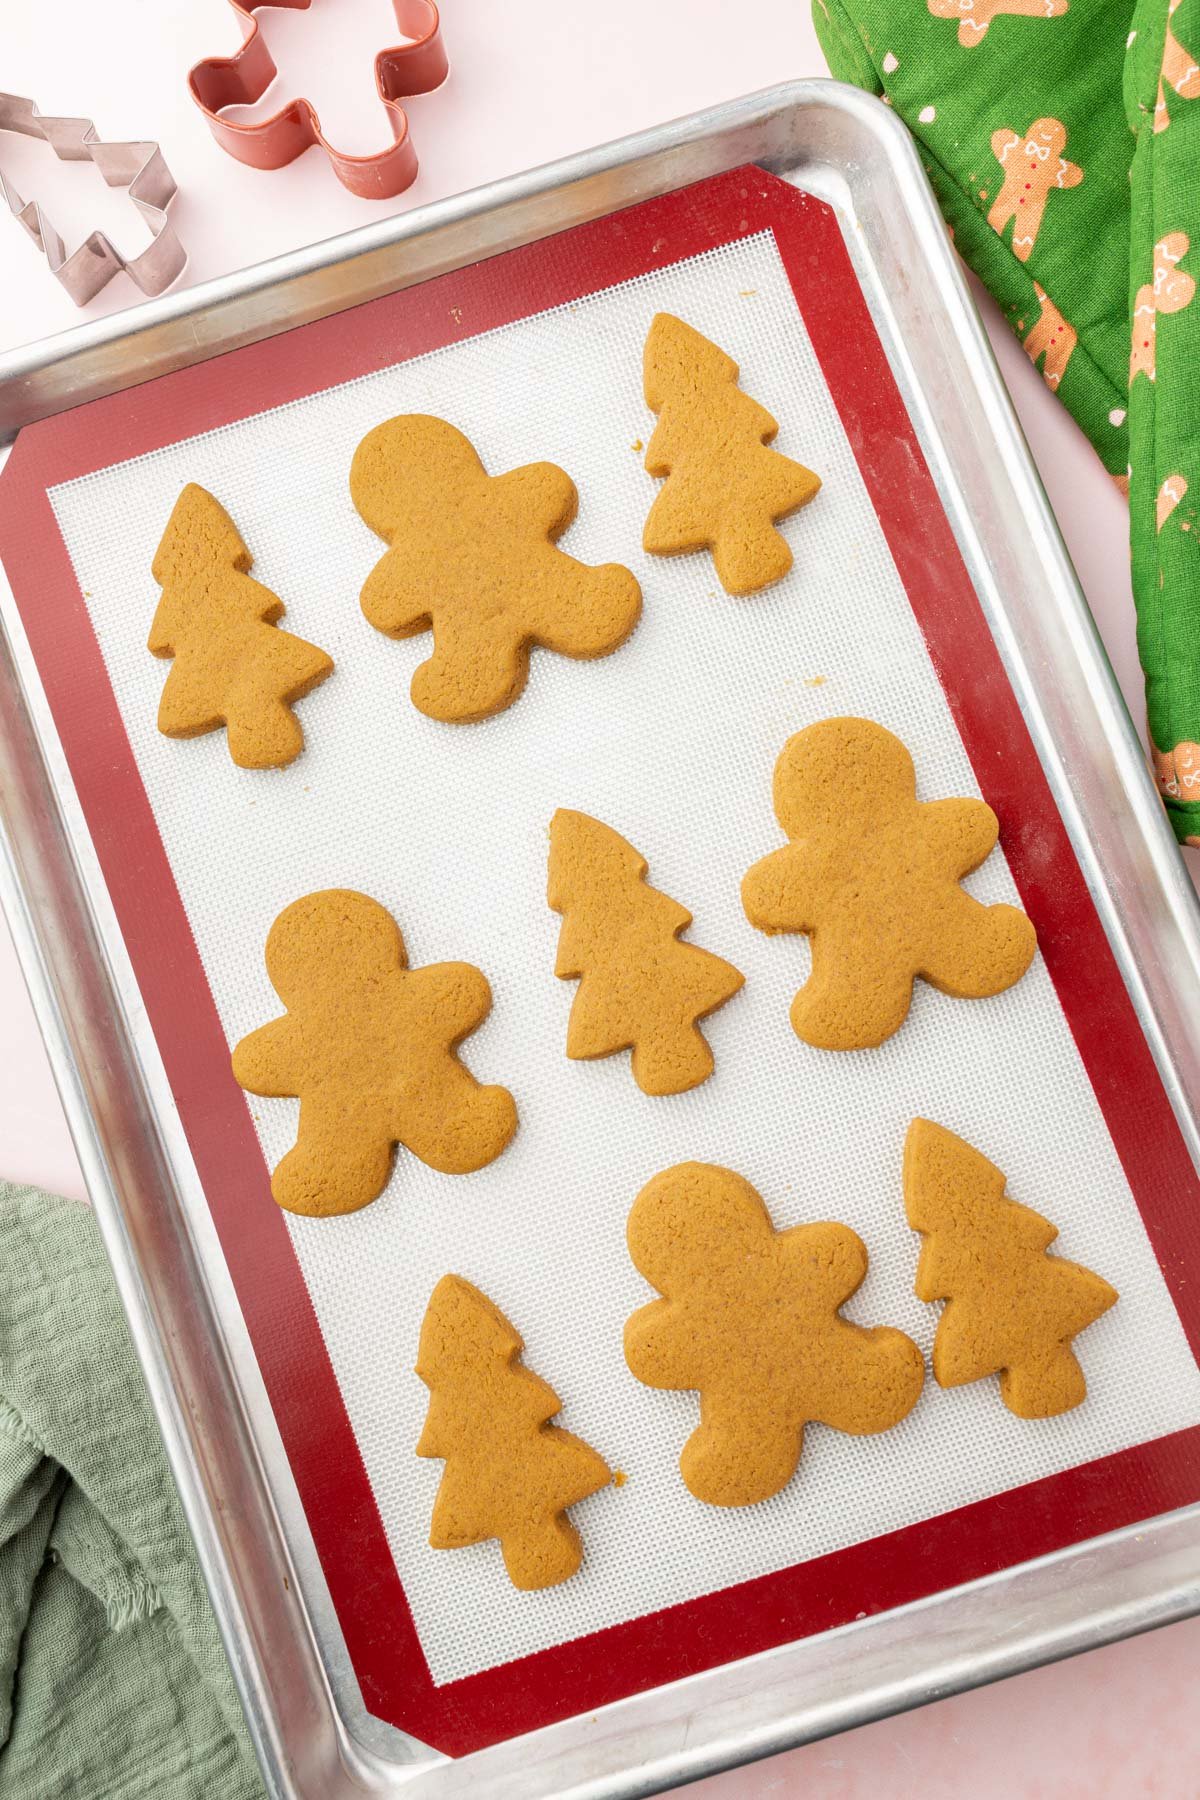 A baking sheet lined with a silicone baking mat with gluten-free gingerbread men and gingerbread Christmas tree cookies on it.